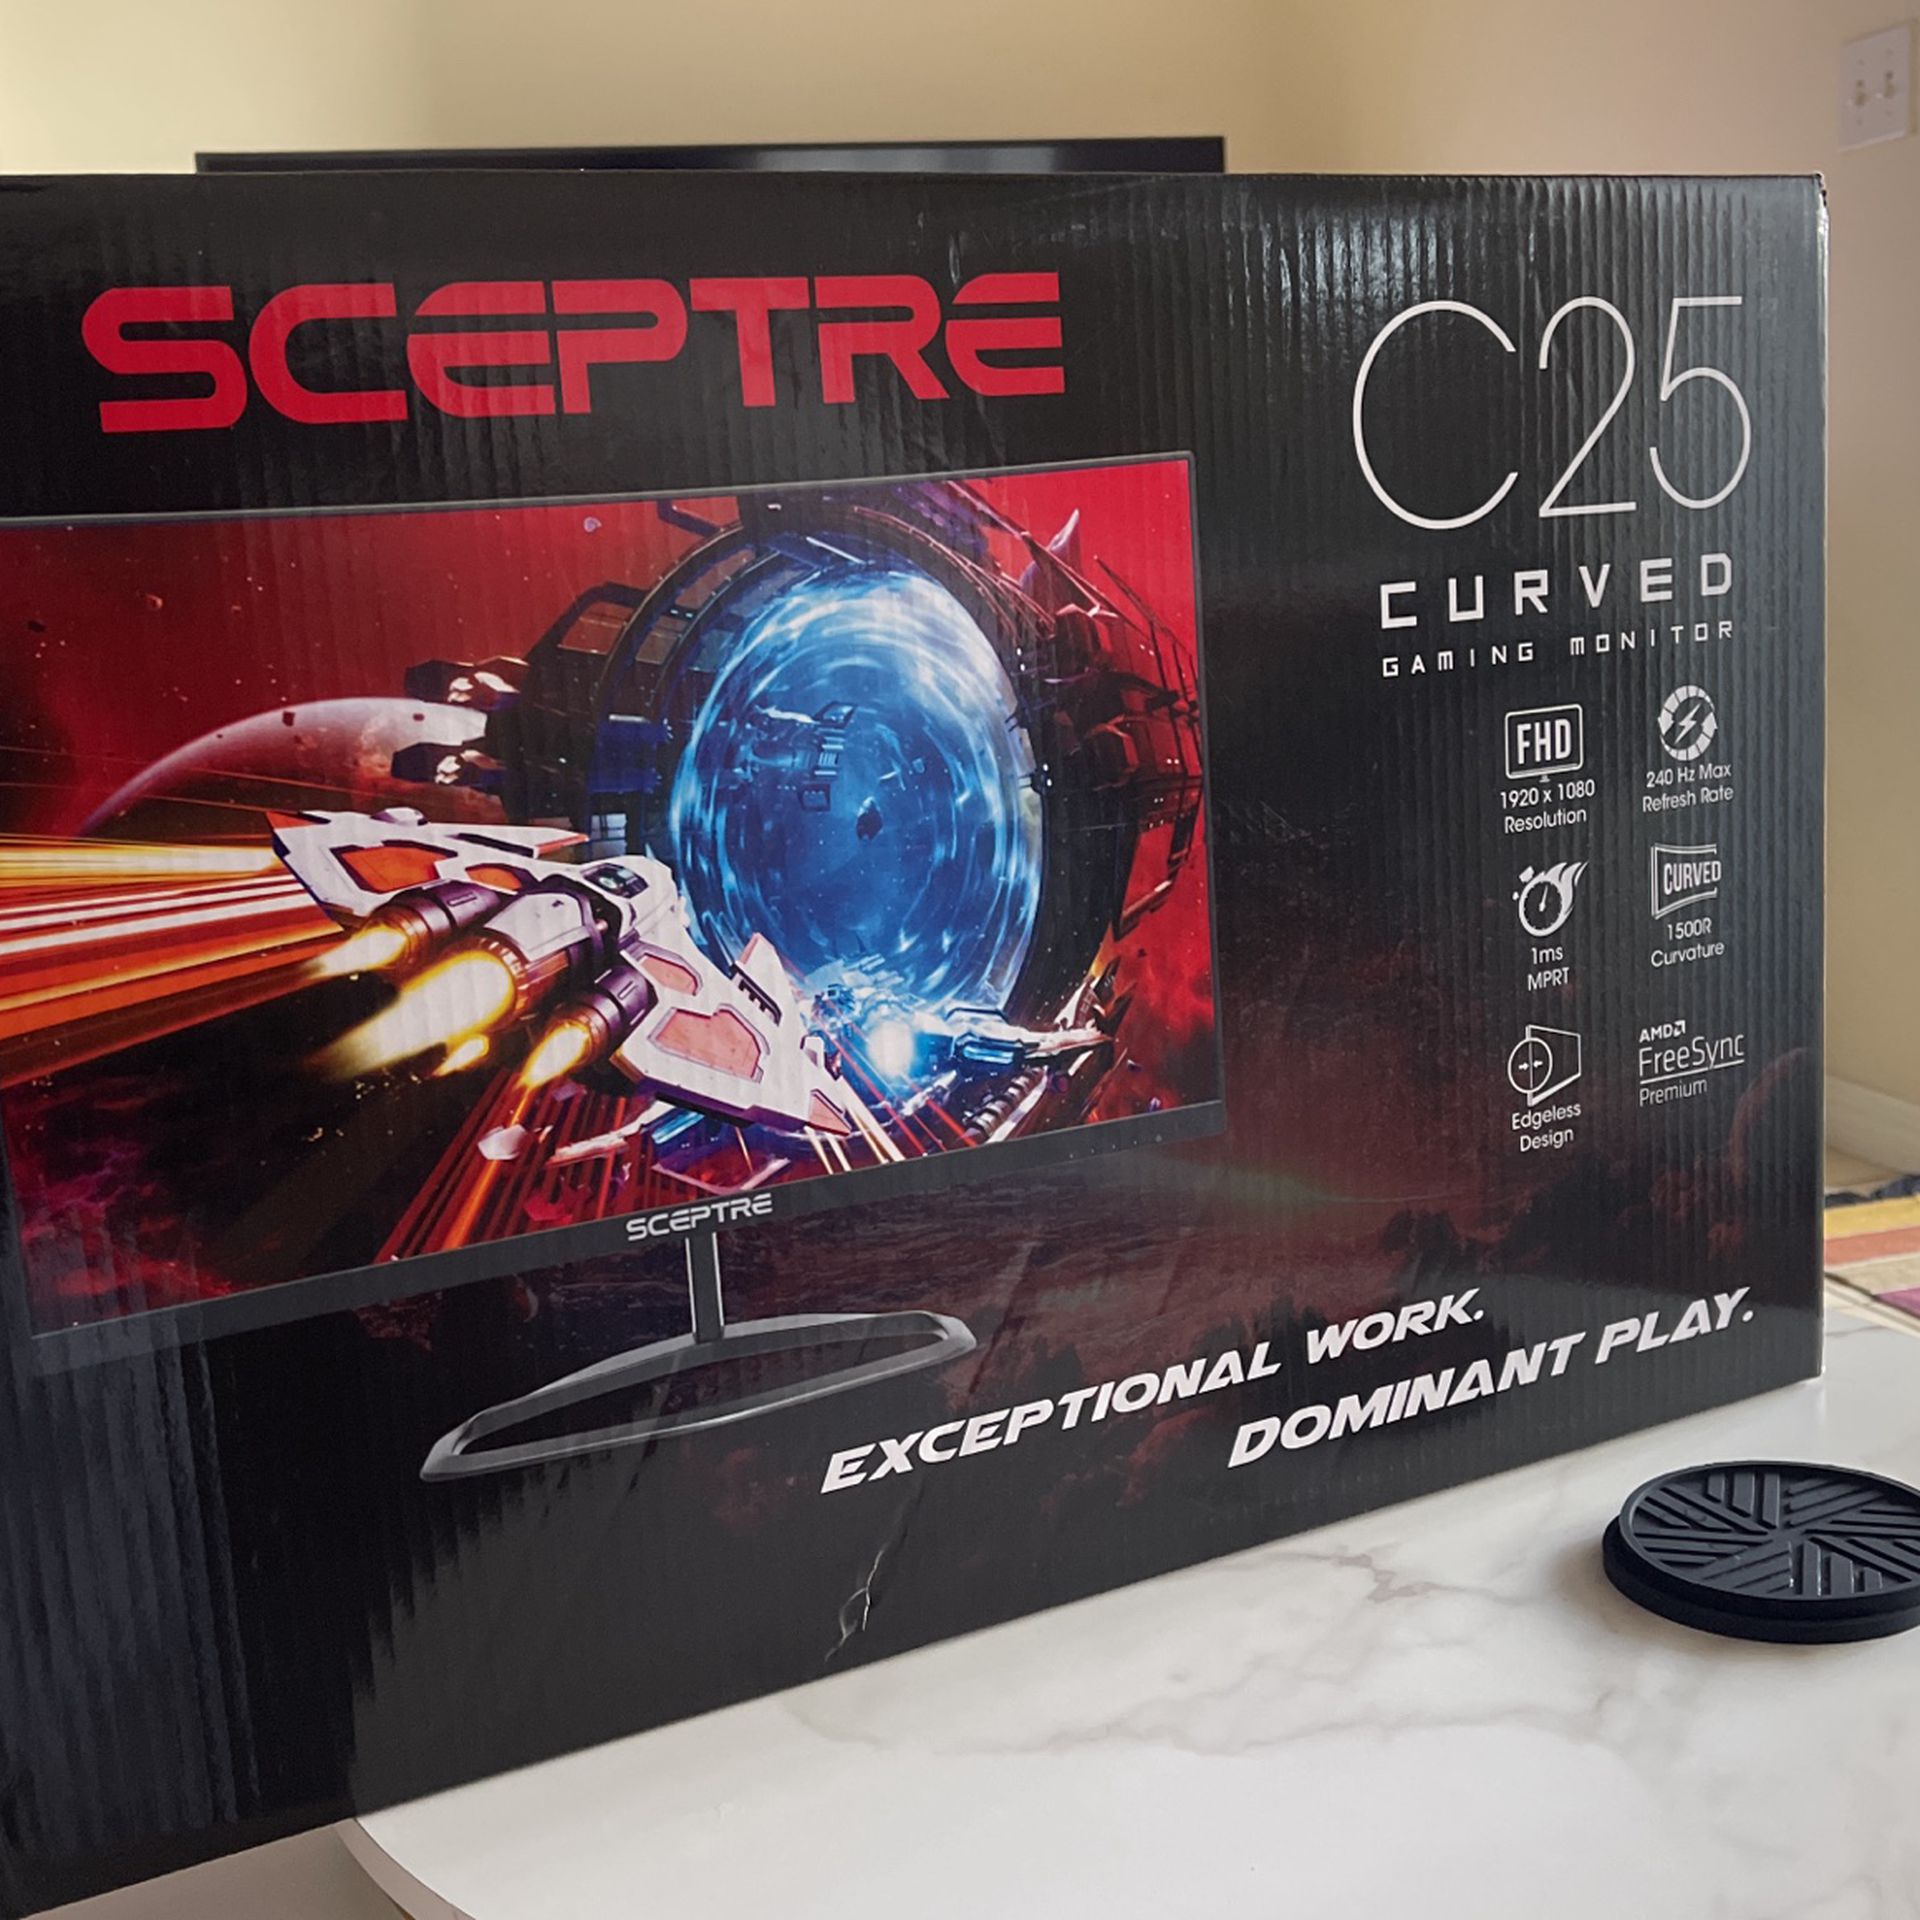 C25 Curved Gaming Monitor 